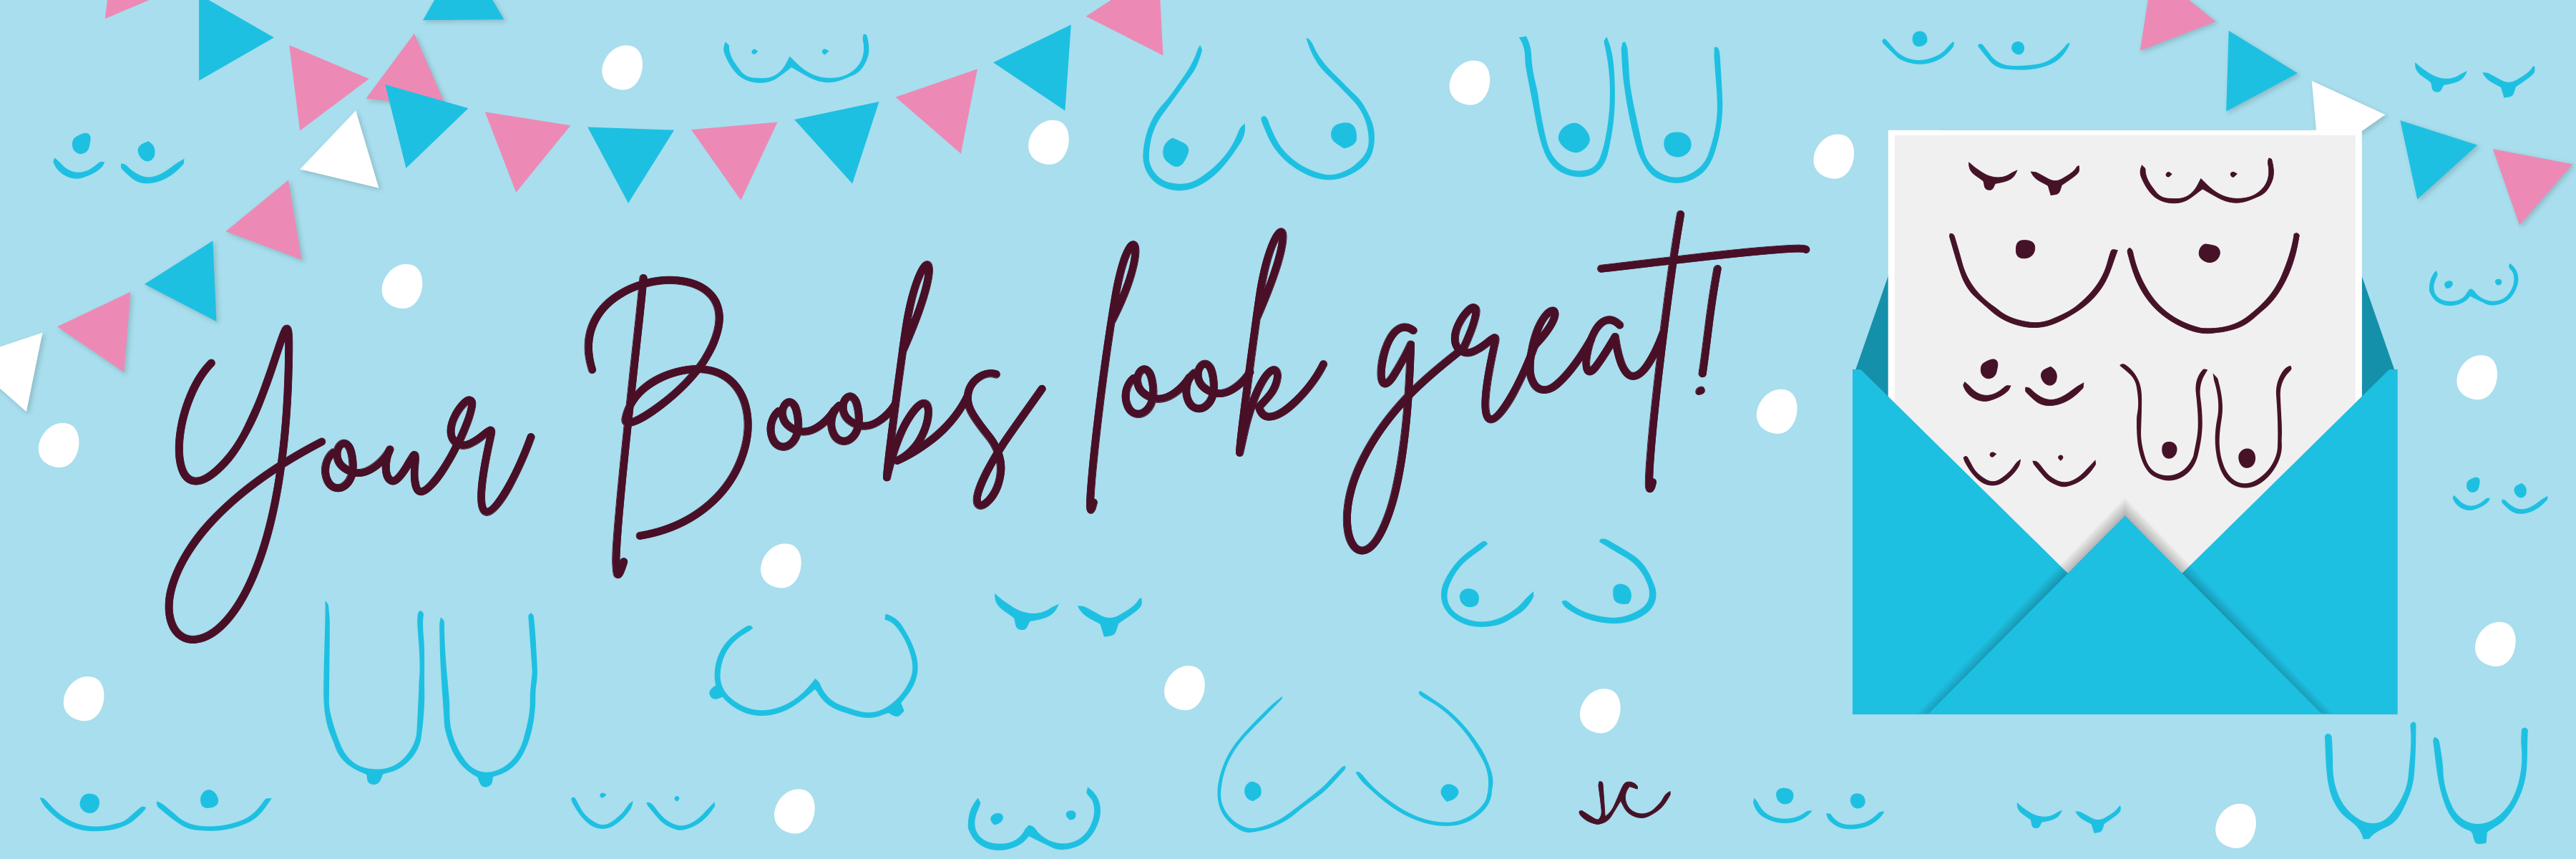 What to Write in a Baby Shower Card - Titty City Design - Your boobs look great - baby shower card